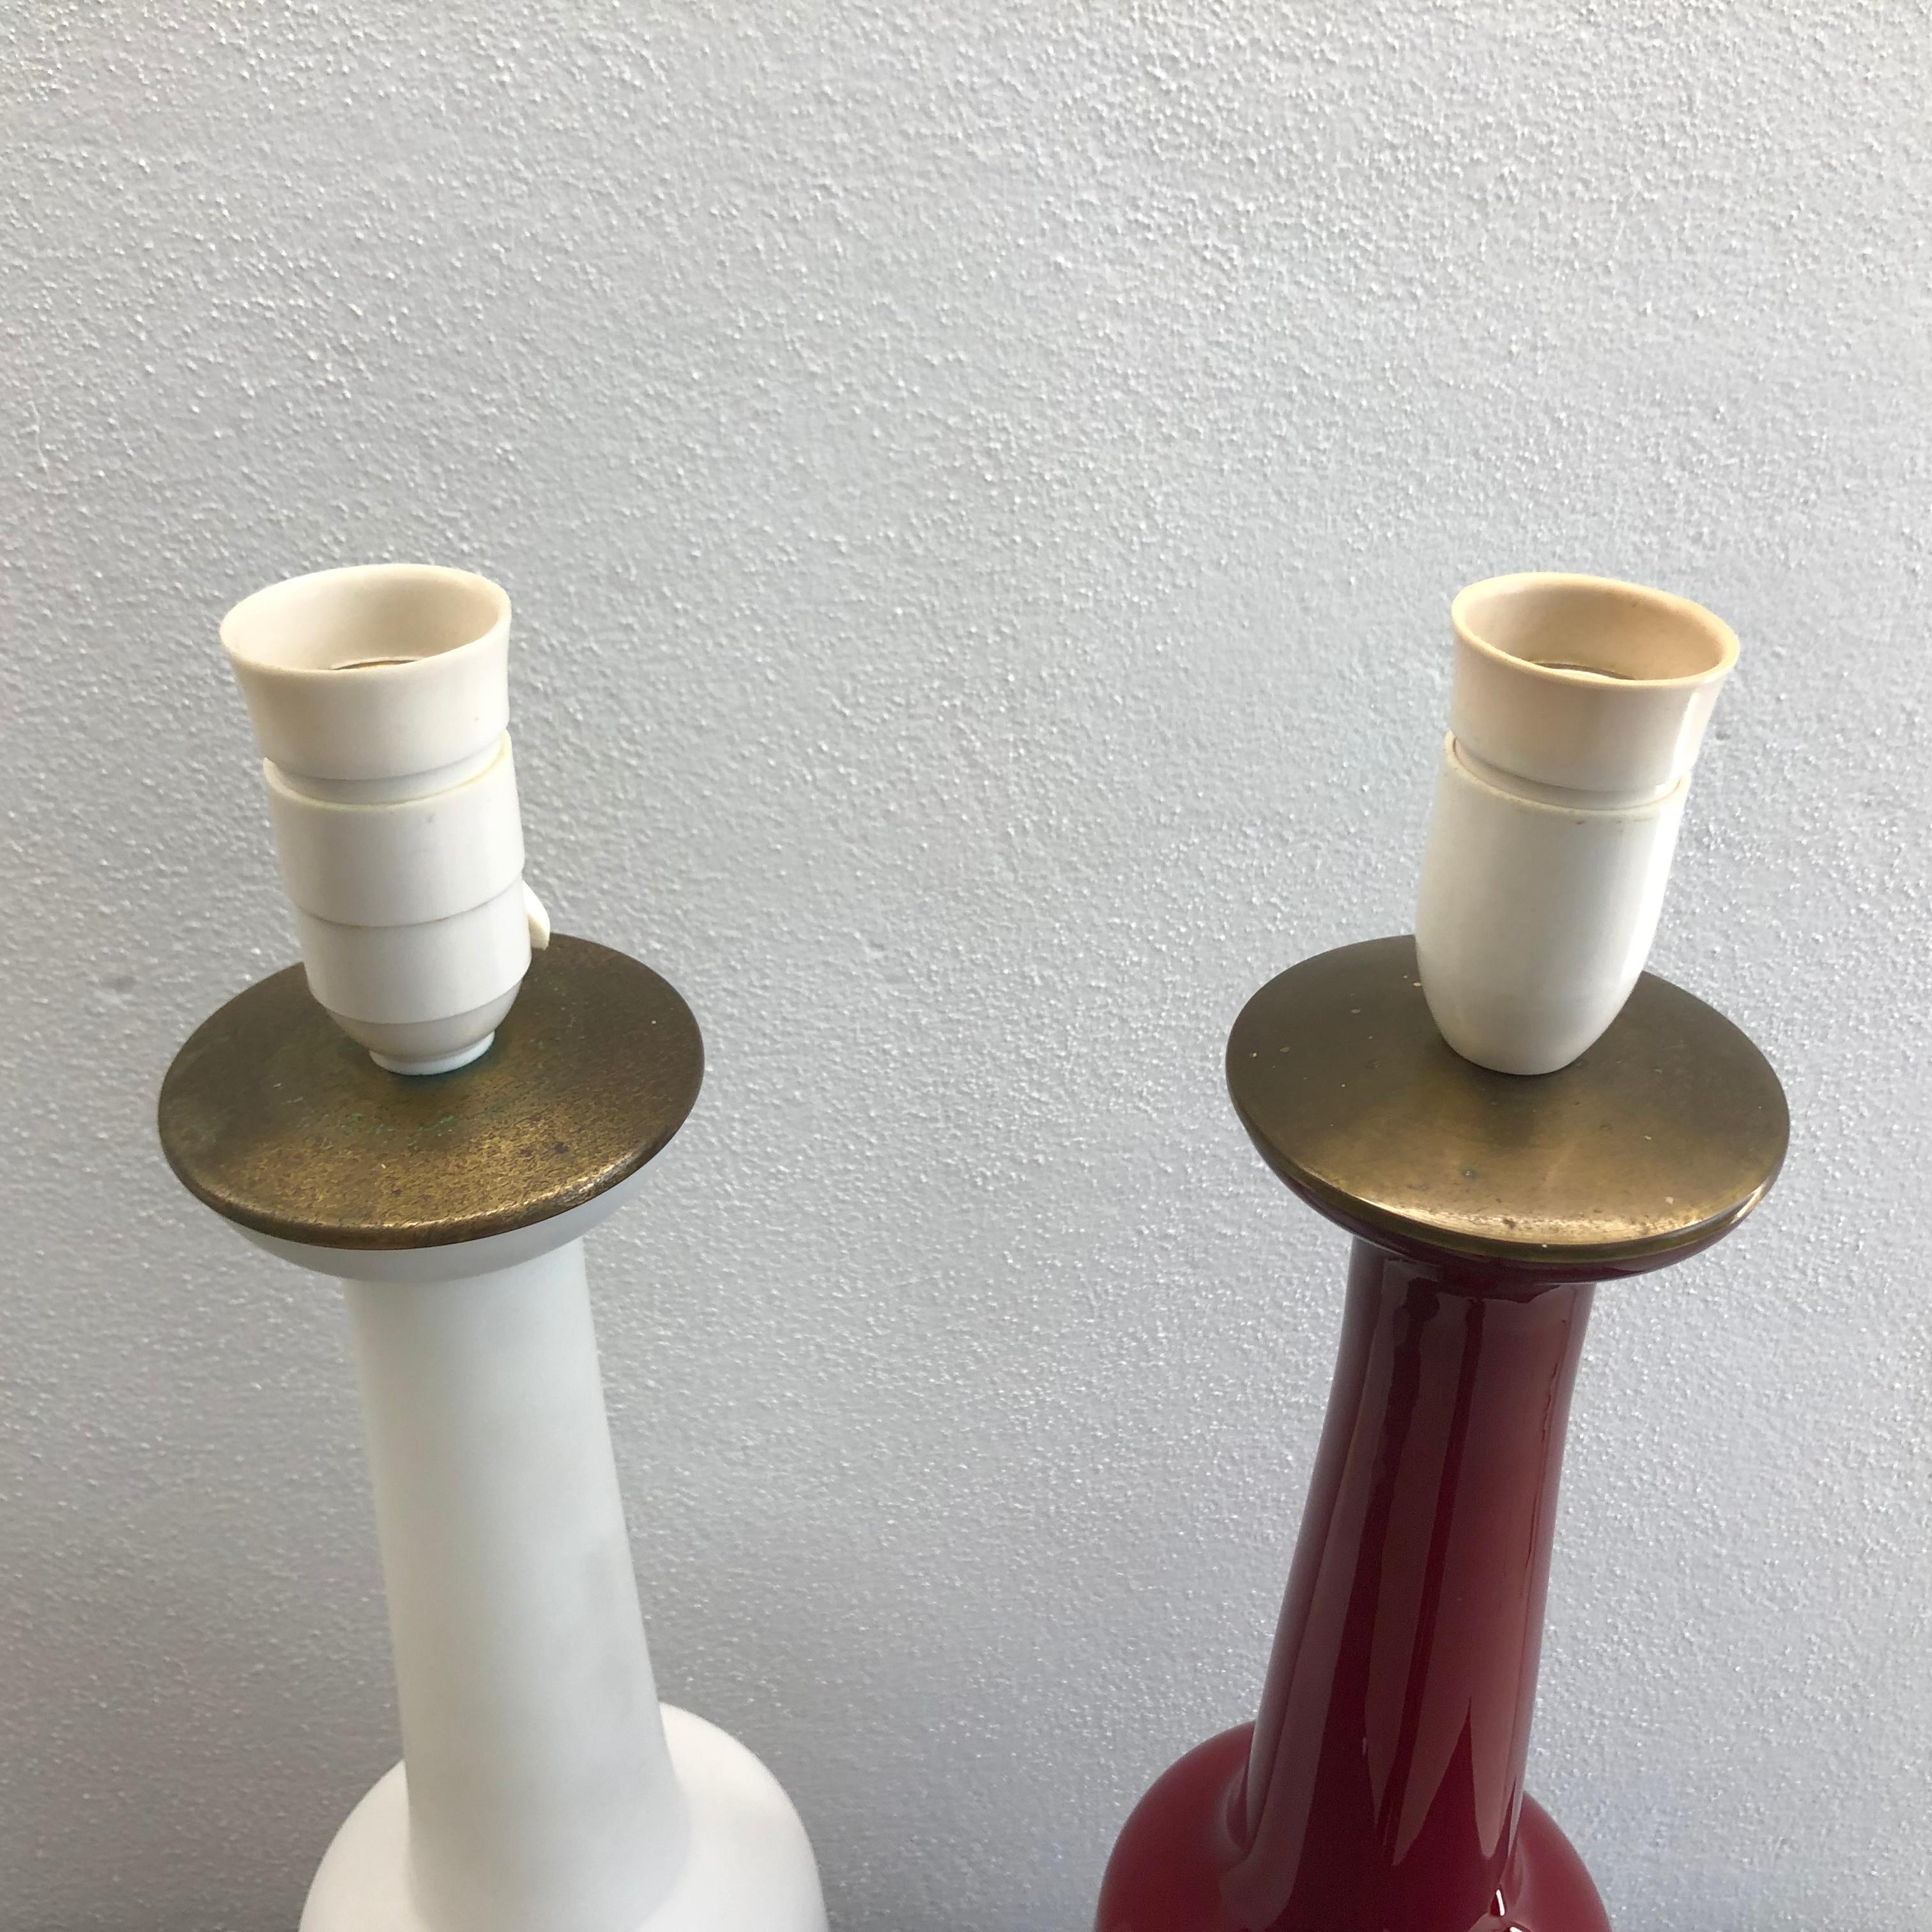 The lamps was designed by Bent Nordsted in 1958 and manufactured by Fyens Glasswork, then a part of Holmegaard Glasswork for Bent Nordsteds firm Nordsted & Co.

One is in mouth blown shinny red opal glass and the other is in Matt white opal